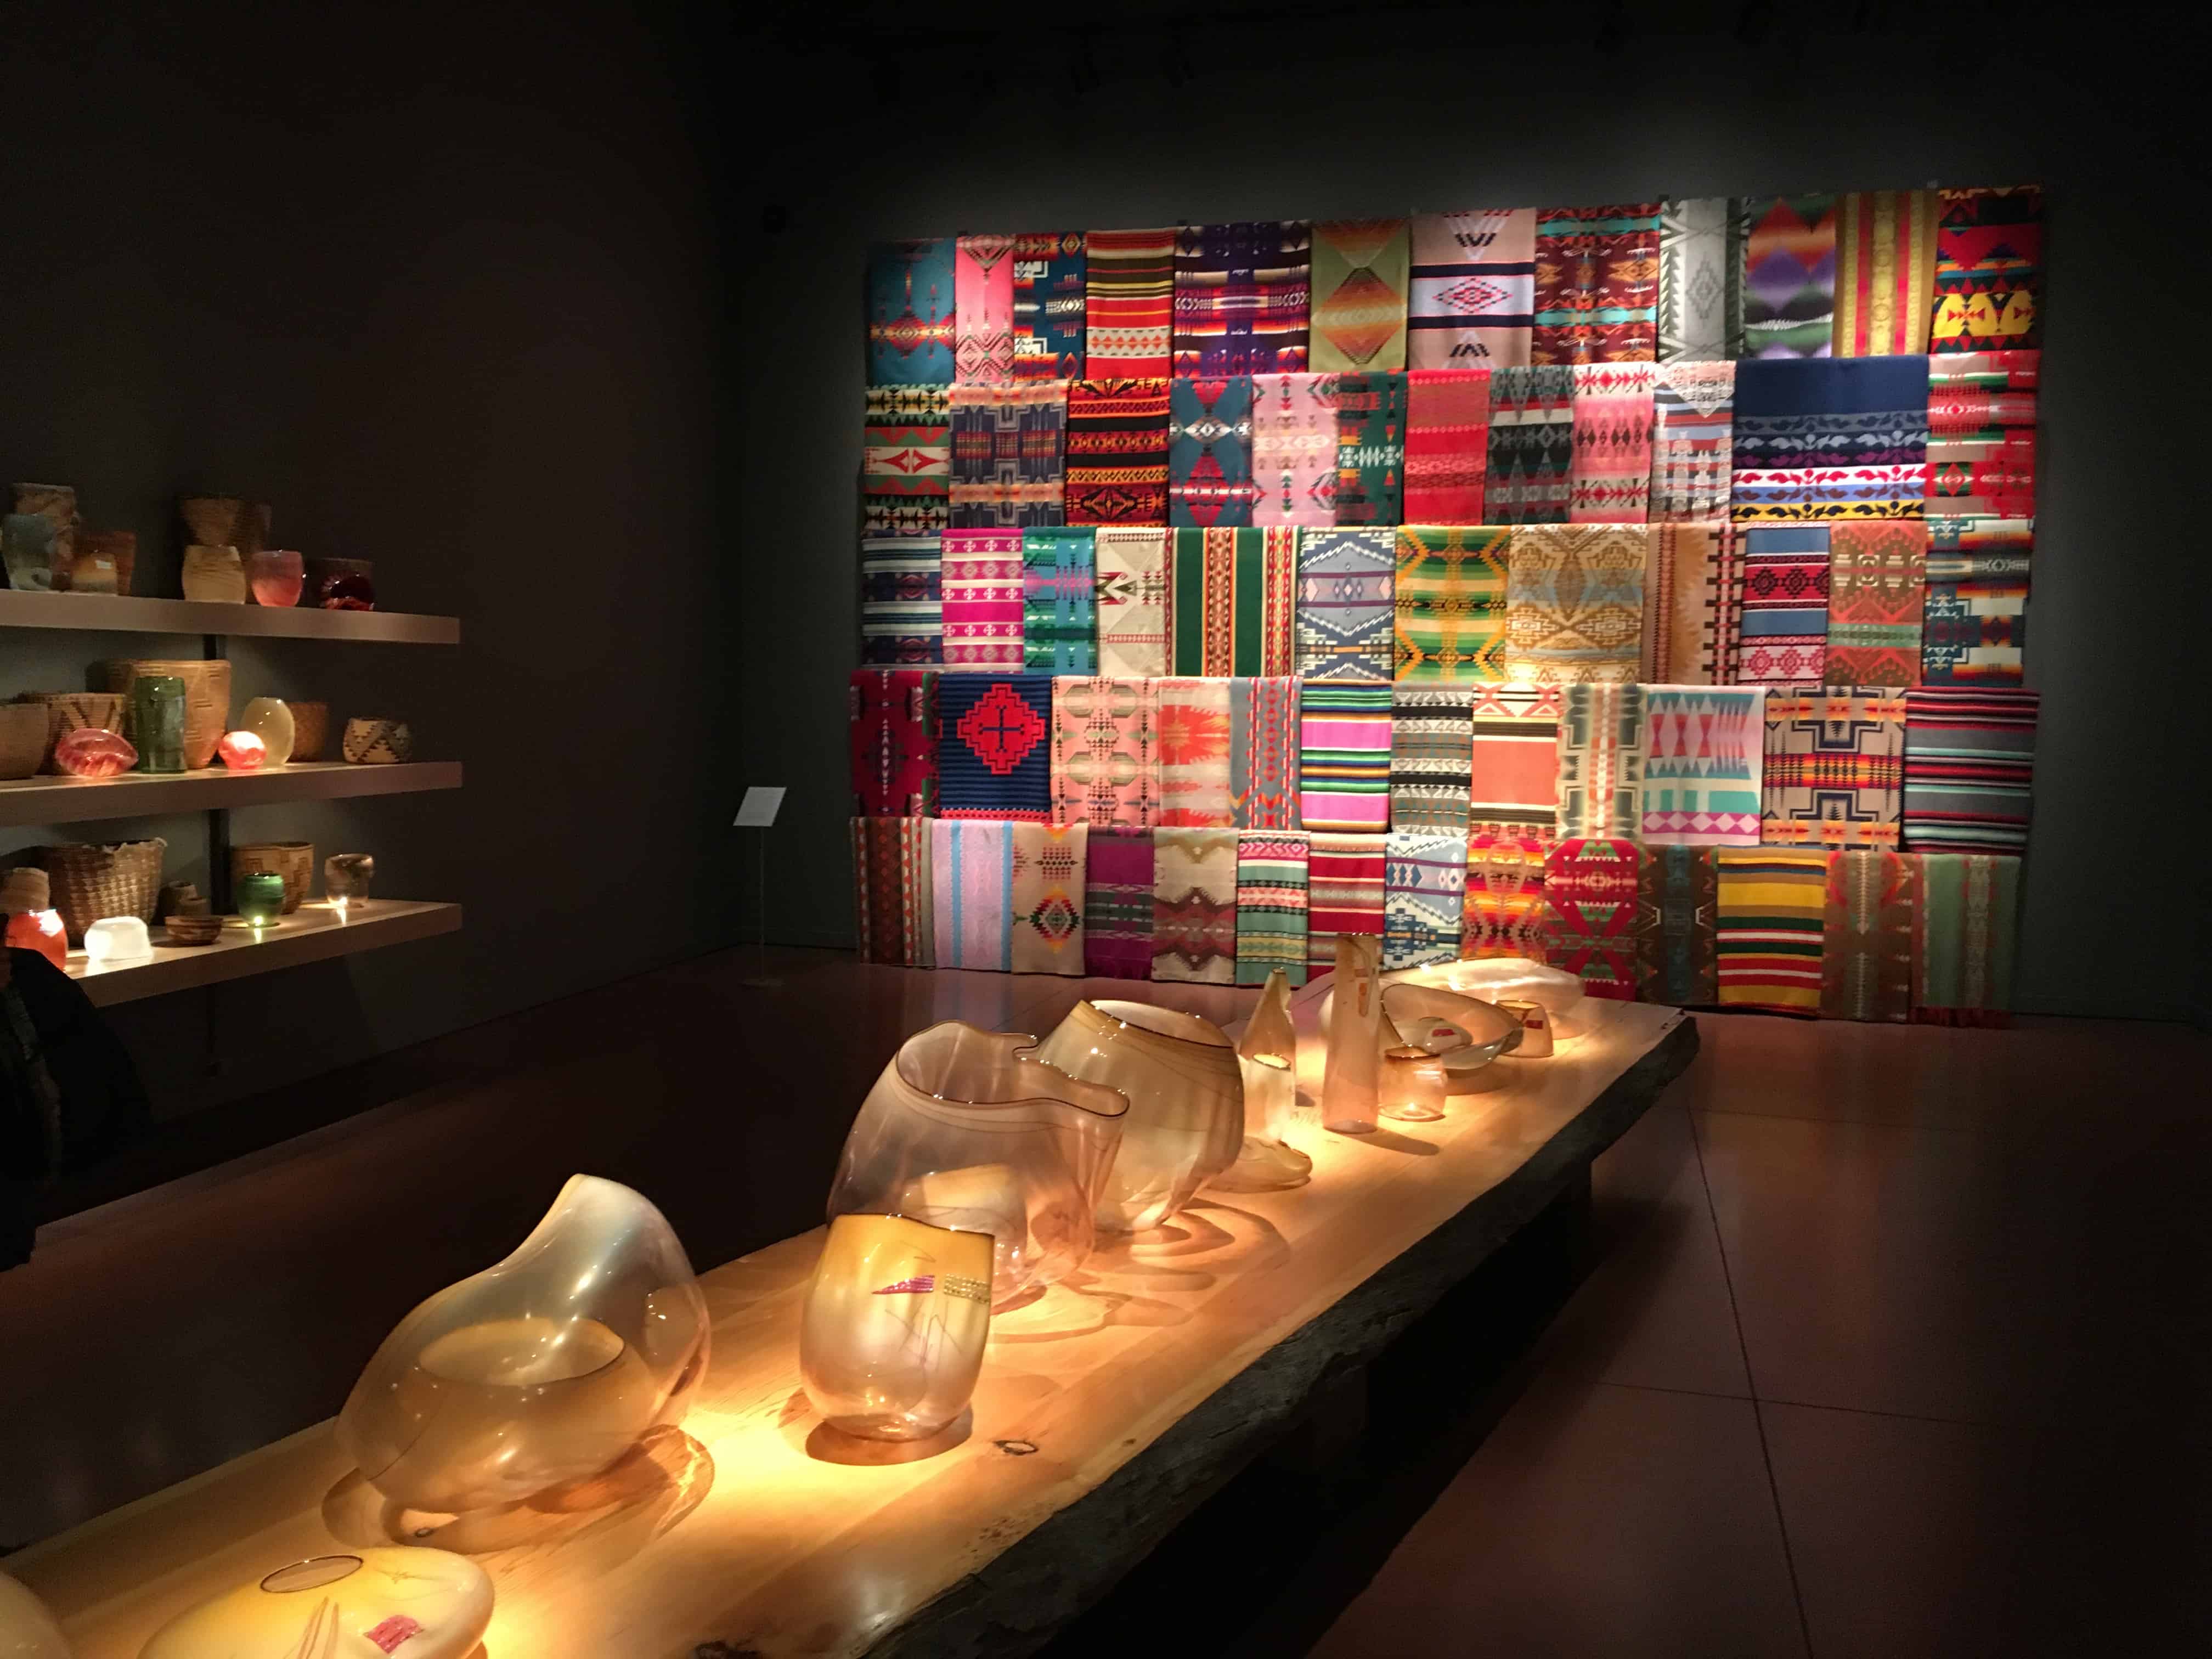 Interior exhibit at Chihuly Garden and Glass in Seattle, Washington